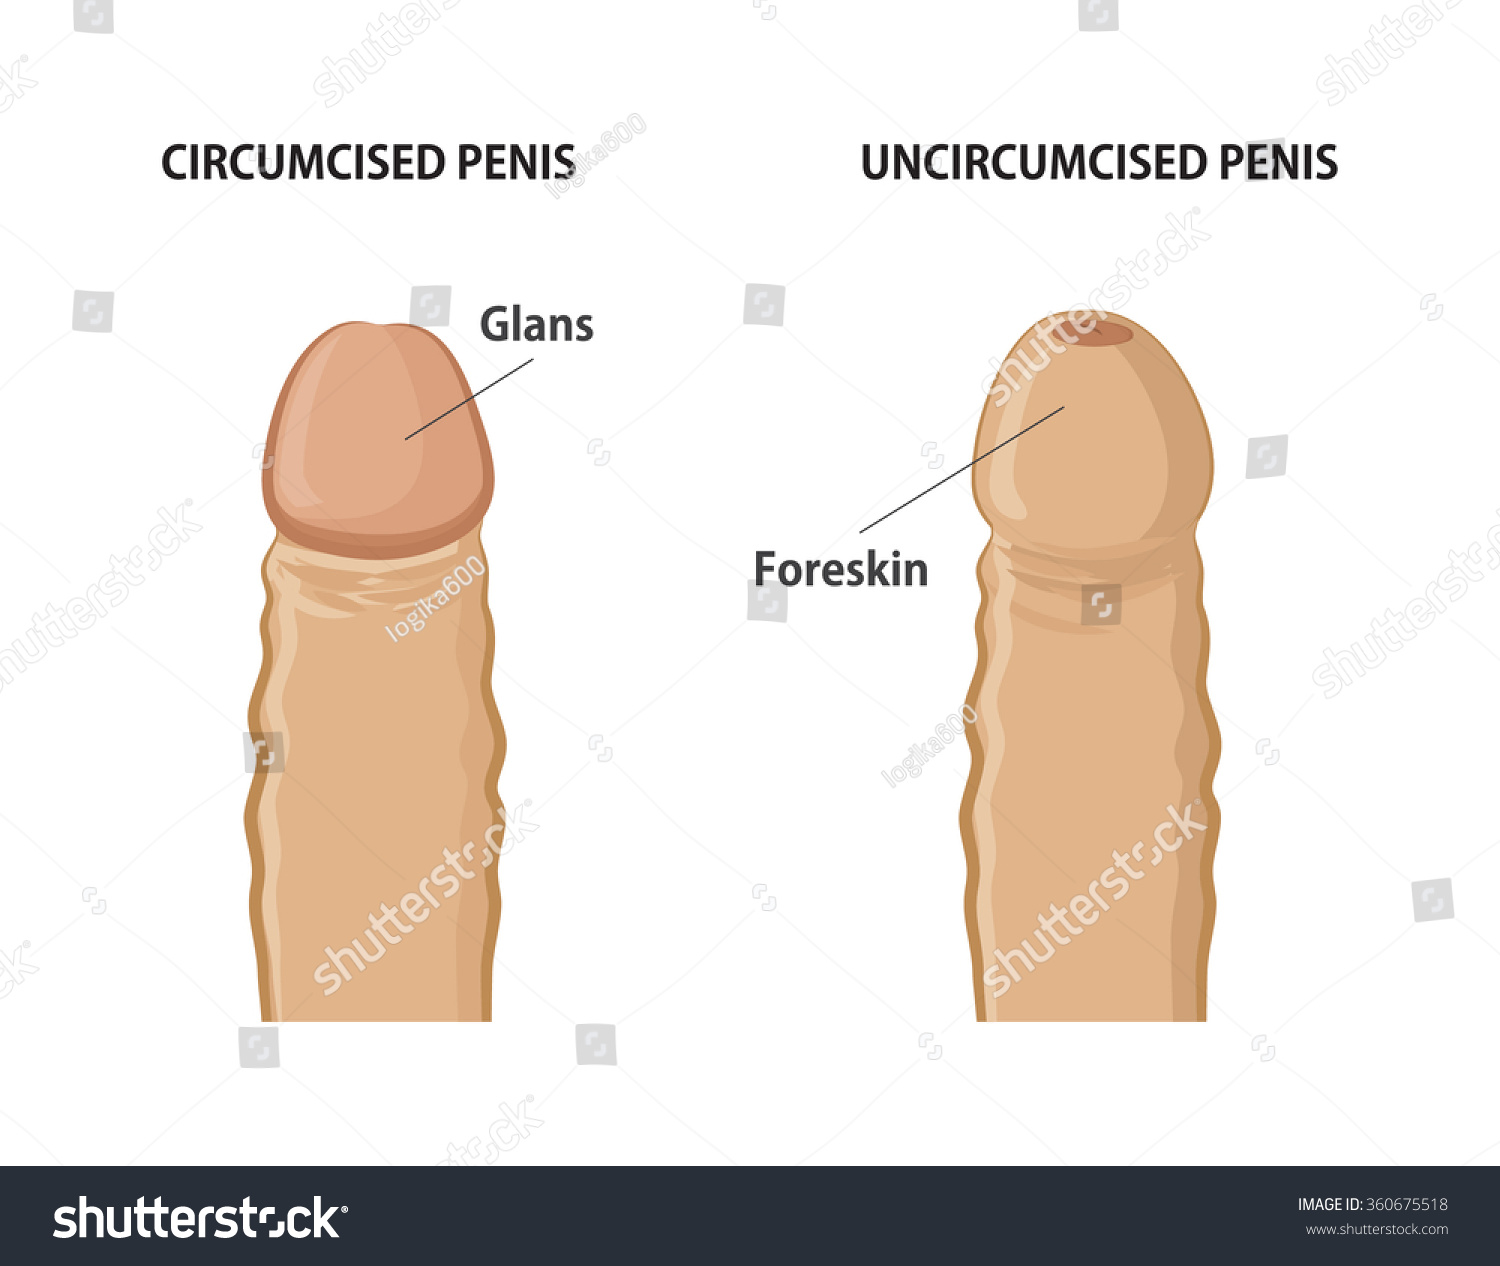 Pictures Of An Uncircumsized Penis 101